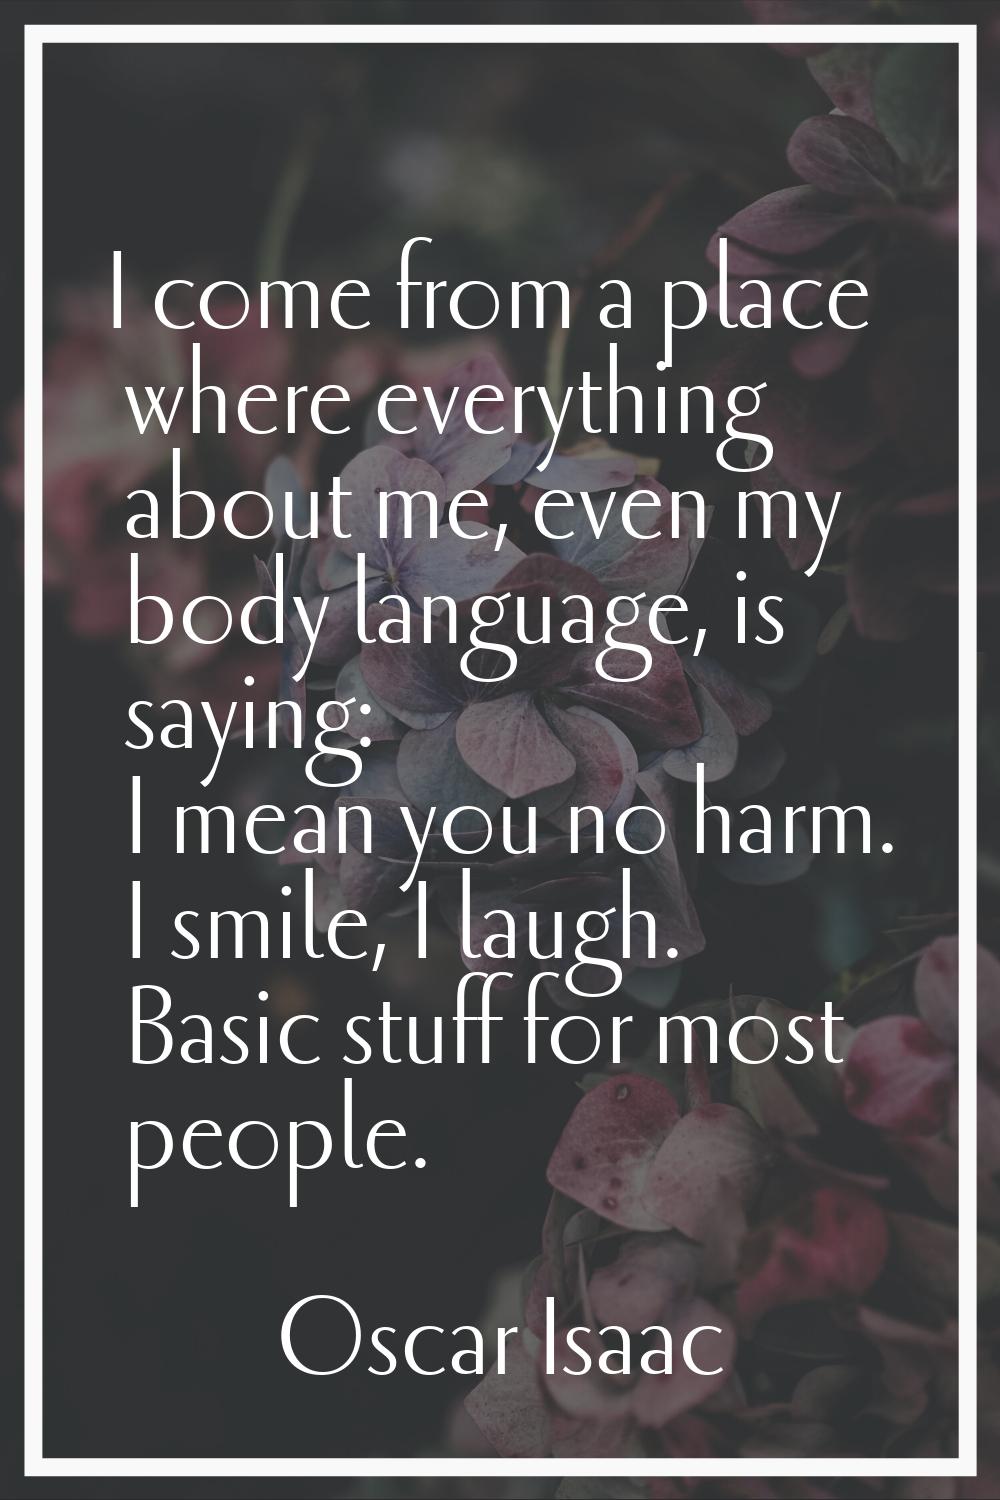 I come from a place where everything about me, even my body language, is saying: I mean you no harm